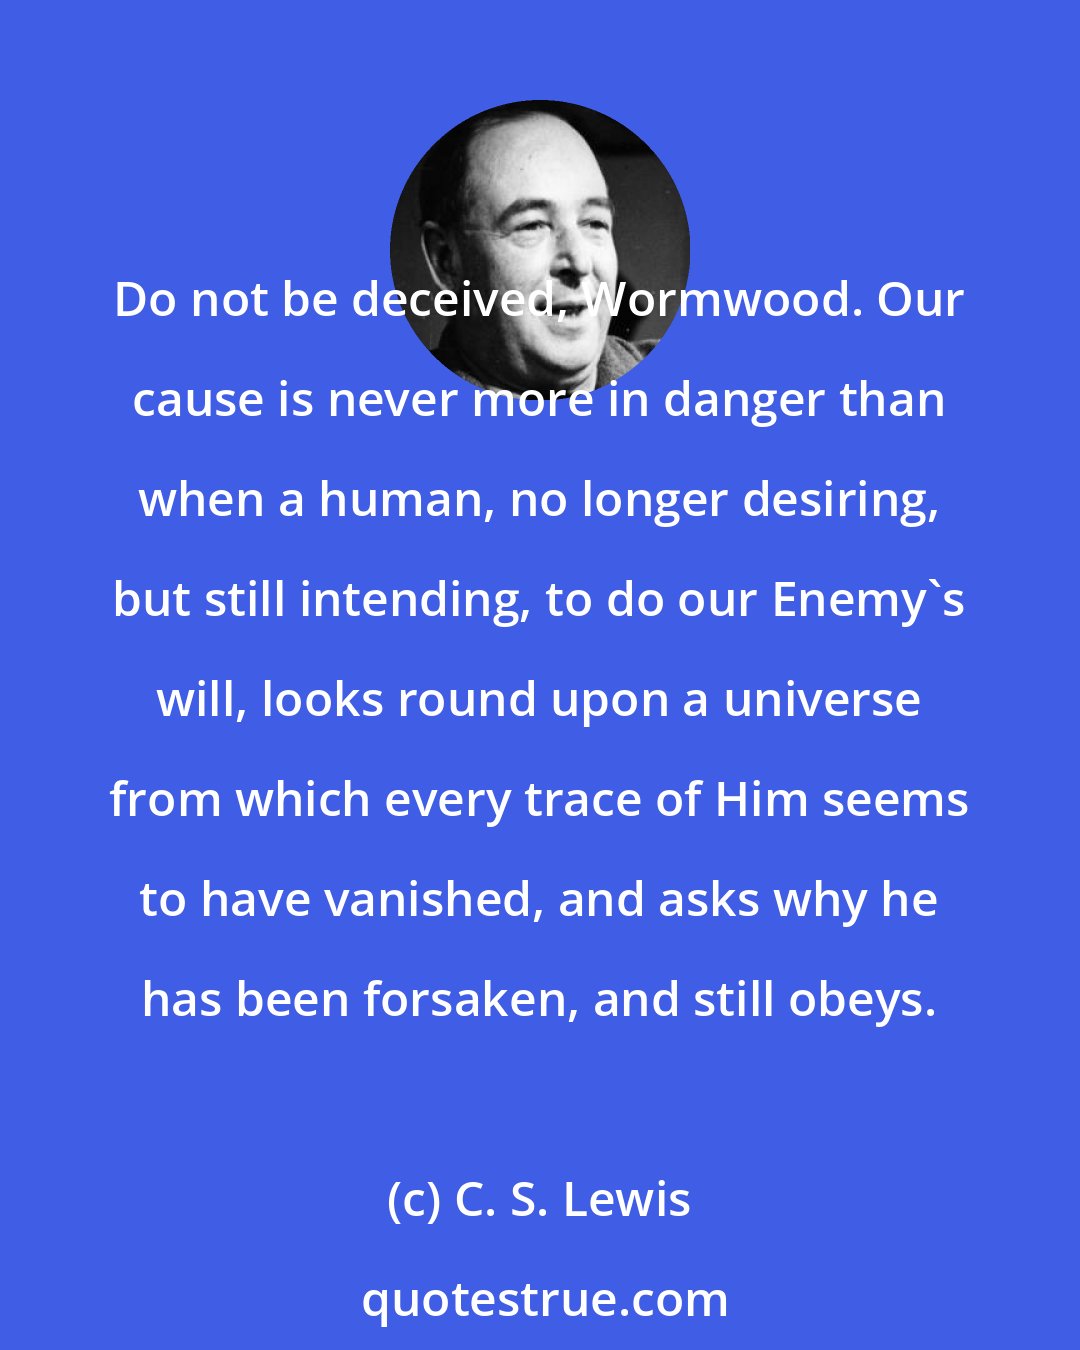 C. S. Lewis: Do not be deceived, Wormwood. Our cause is never more in danger than when a human, no longer desiring, but still intending, to do our Enemy's will, looks round upon a universe from which every trace of Him seems to have vanished, and asks why he has been forsaken, and still obeys.